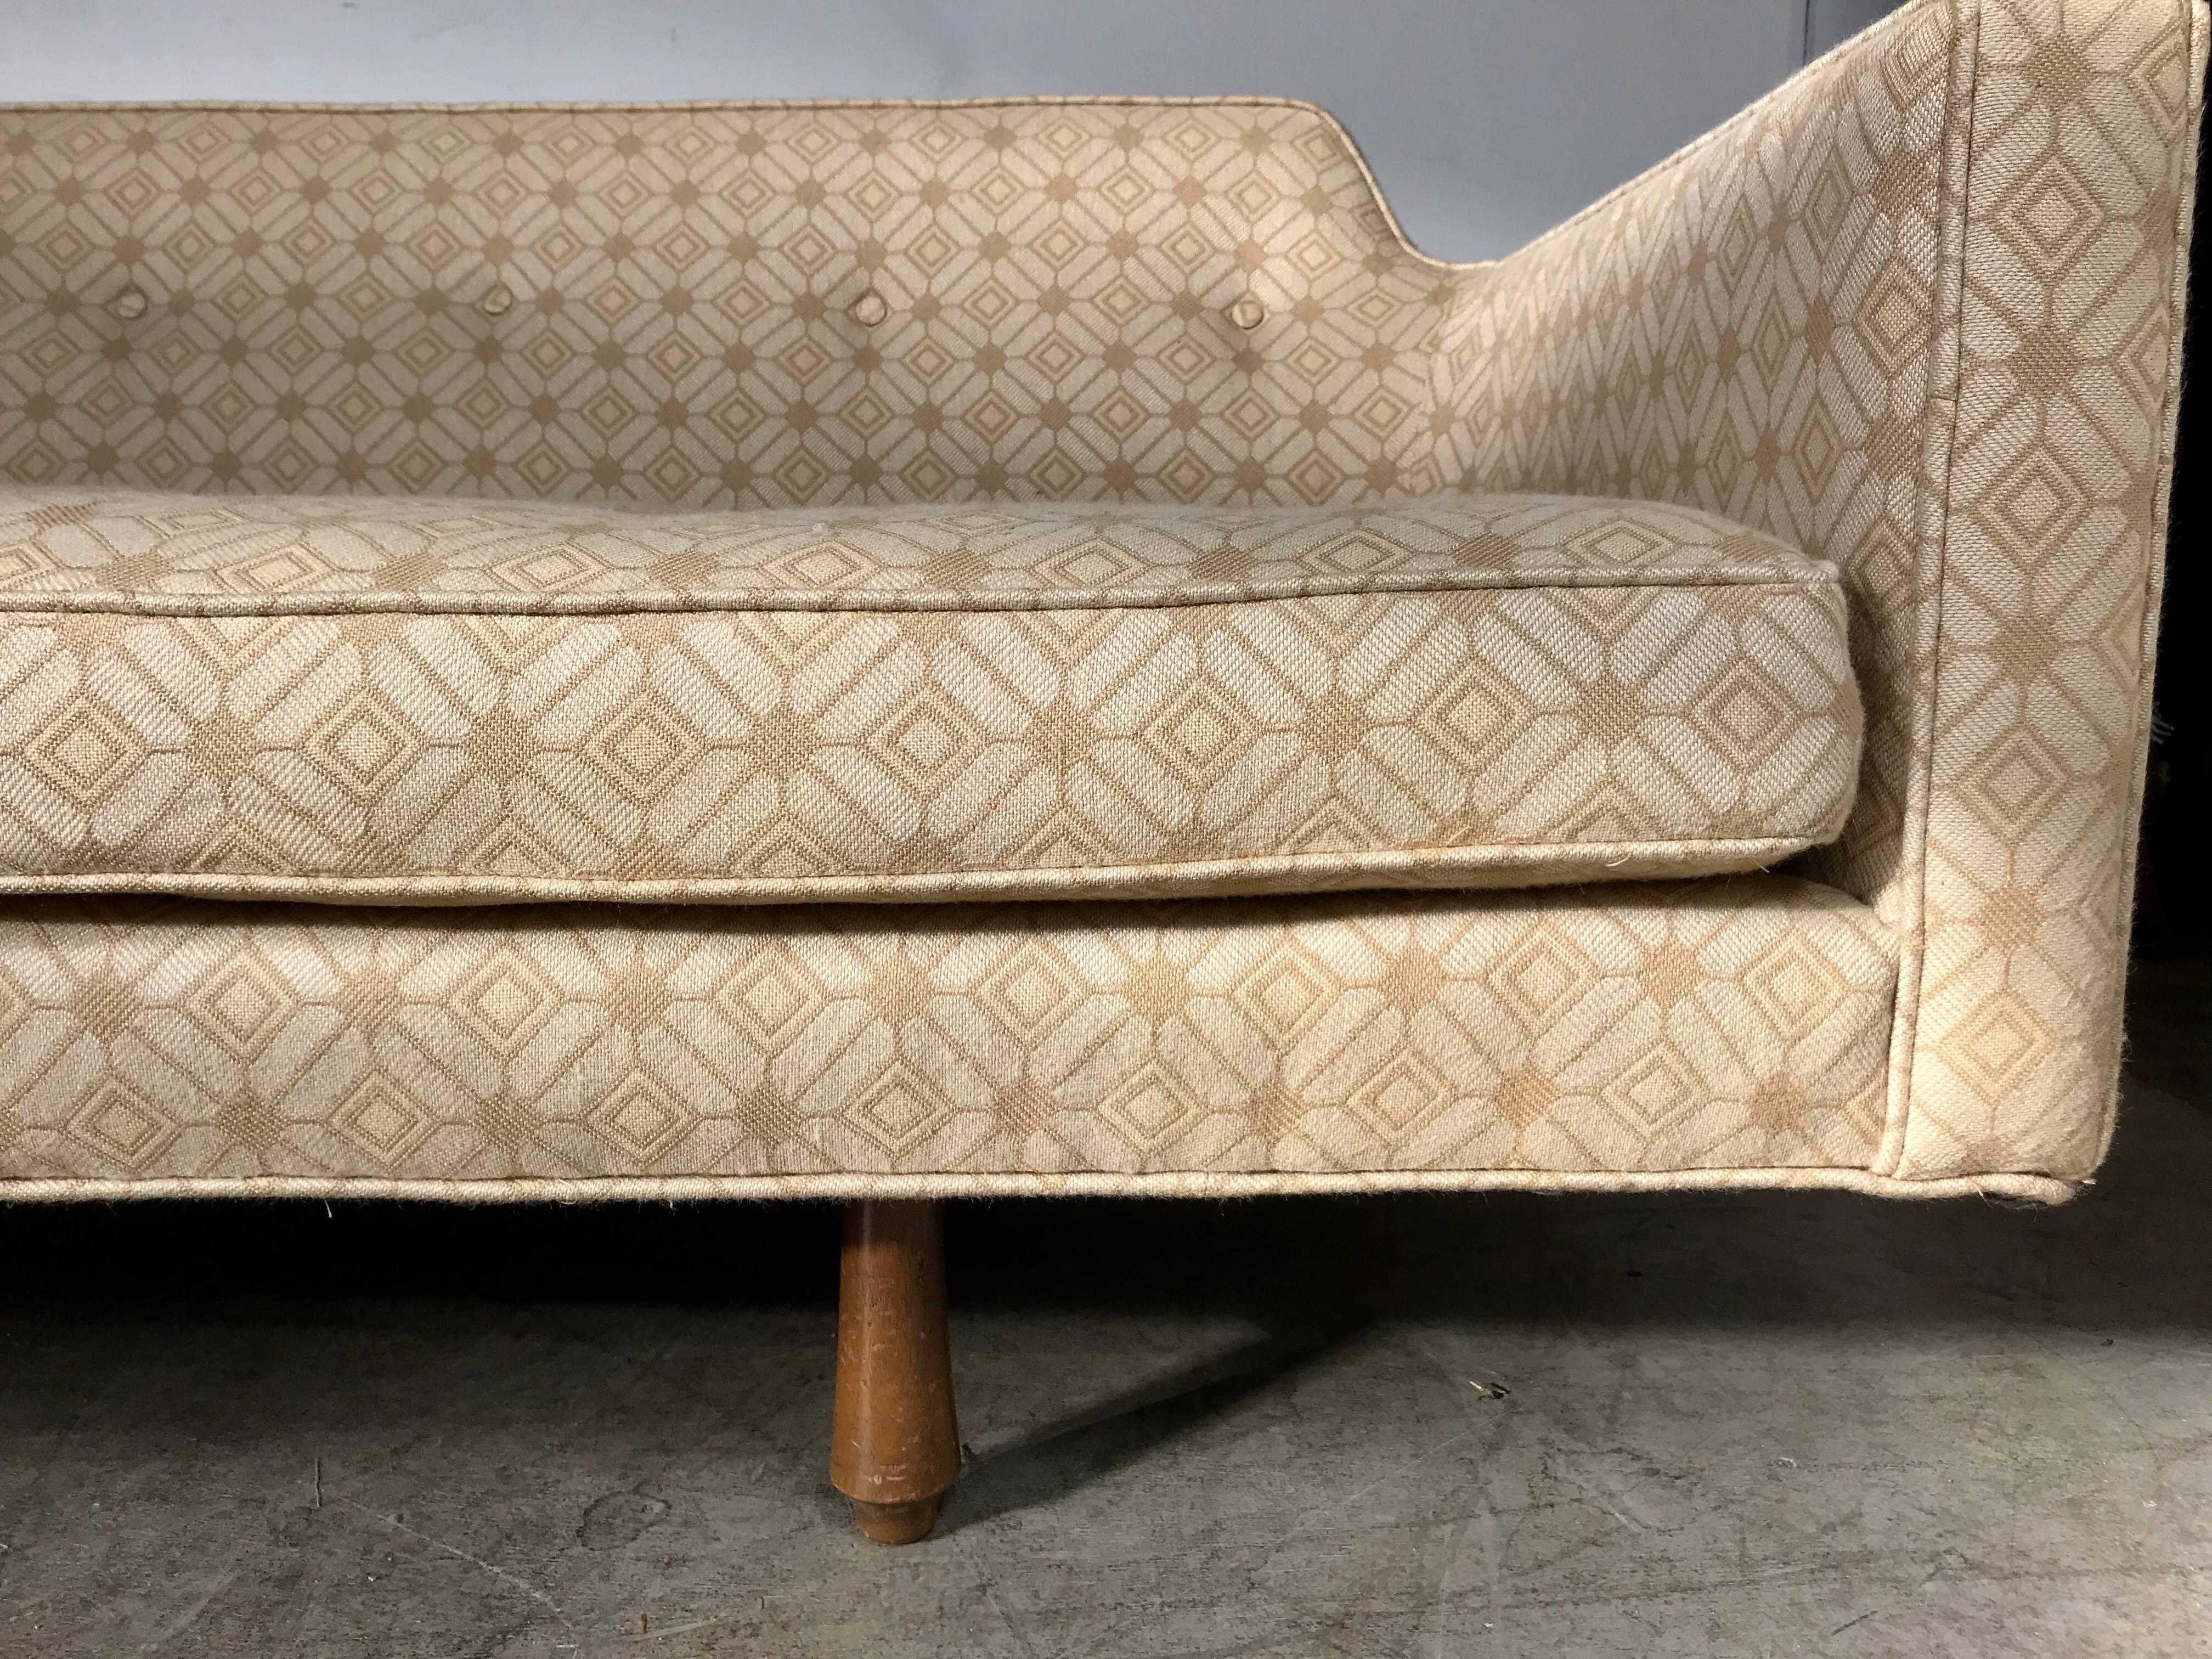 Modernist sofa designed by Edward Wormley for Dunbar, Wonderful example, down cushions, Retains fabulous original fabric in nice condition. Sensuous graceful lines, Hand delivery avail to New York City or anywhere en route from Buffalo New York.